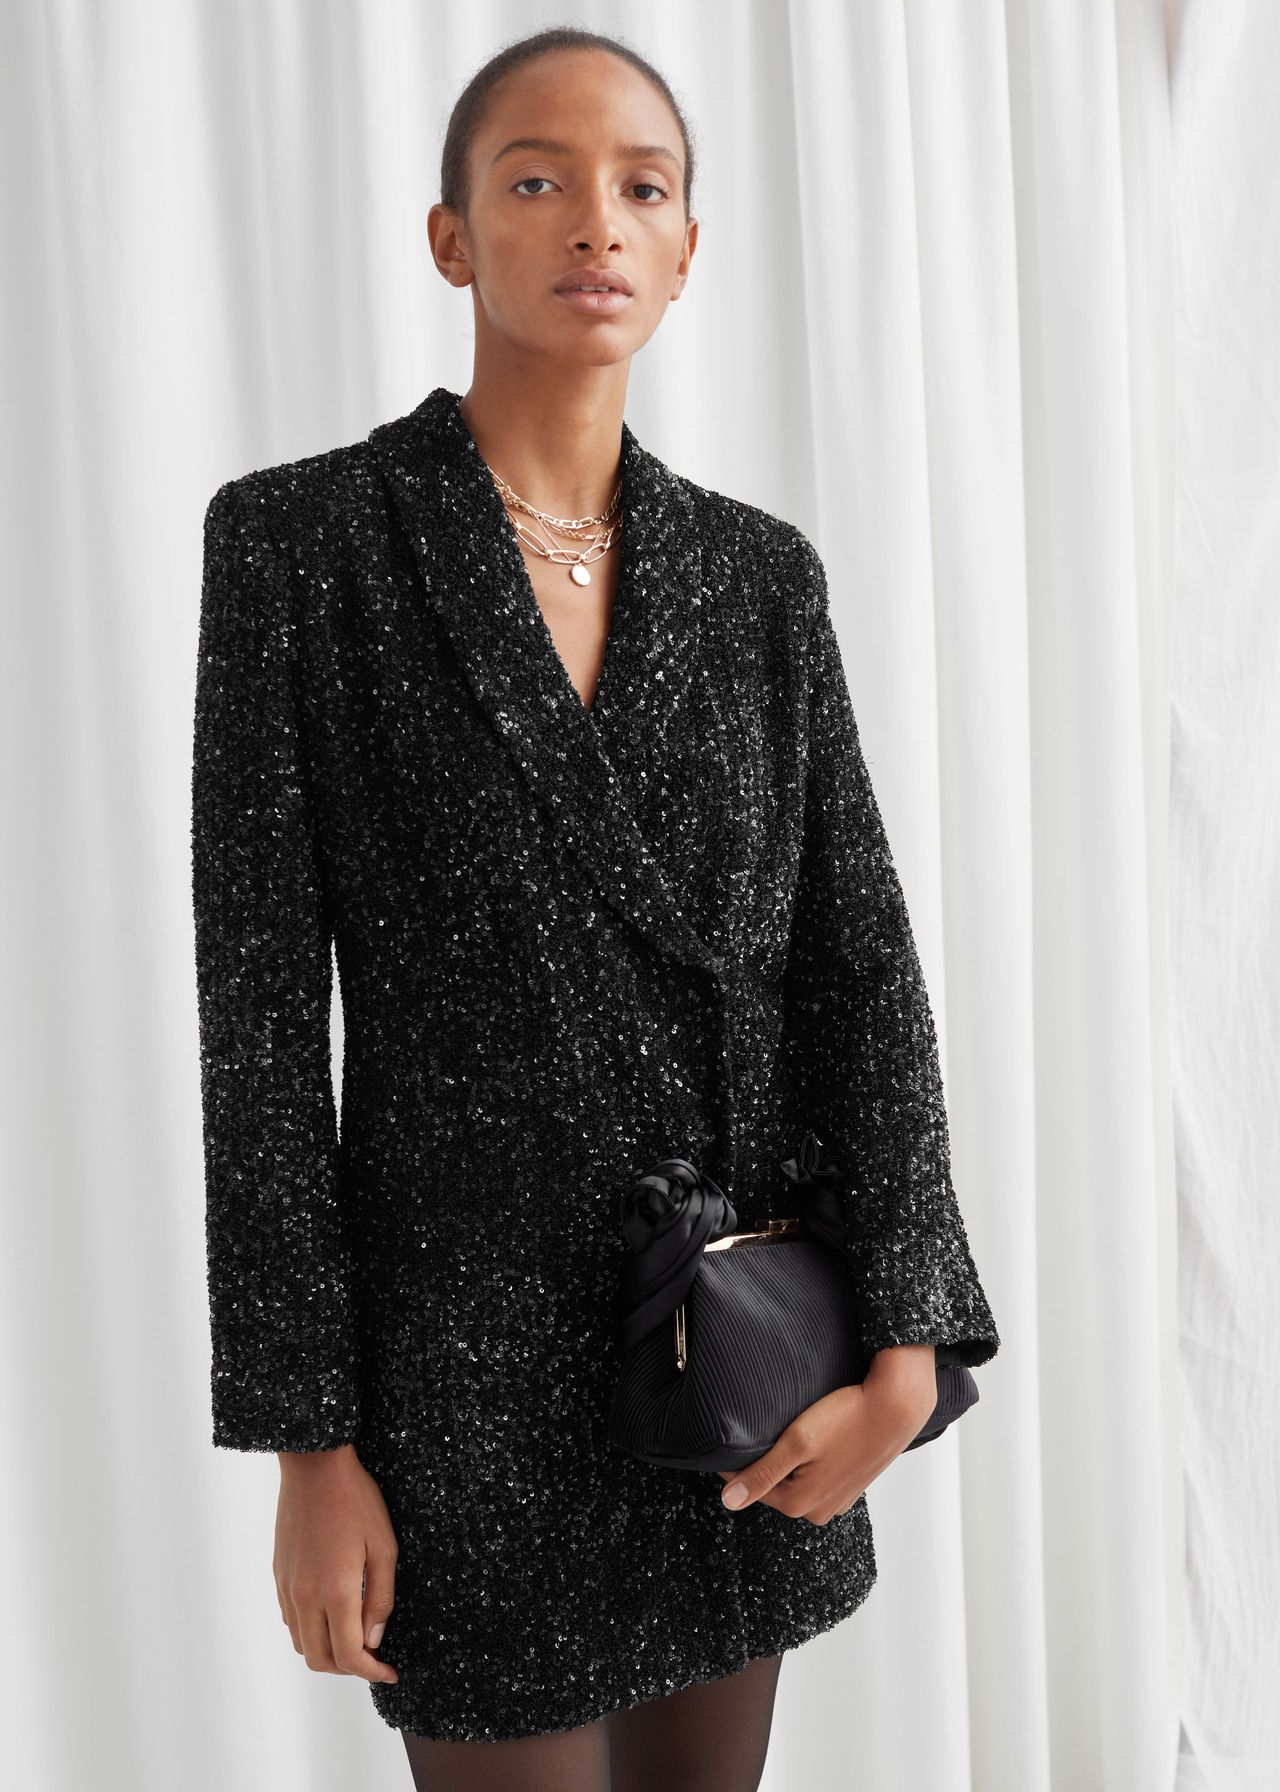 The 23 Best Sequin Clothes, From Dresses to Tops | Who What Wear